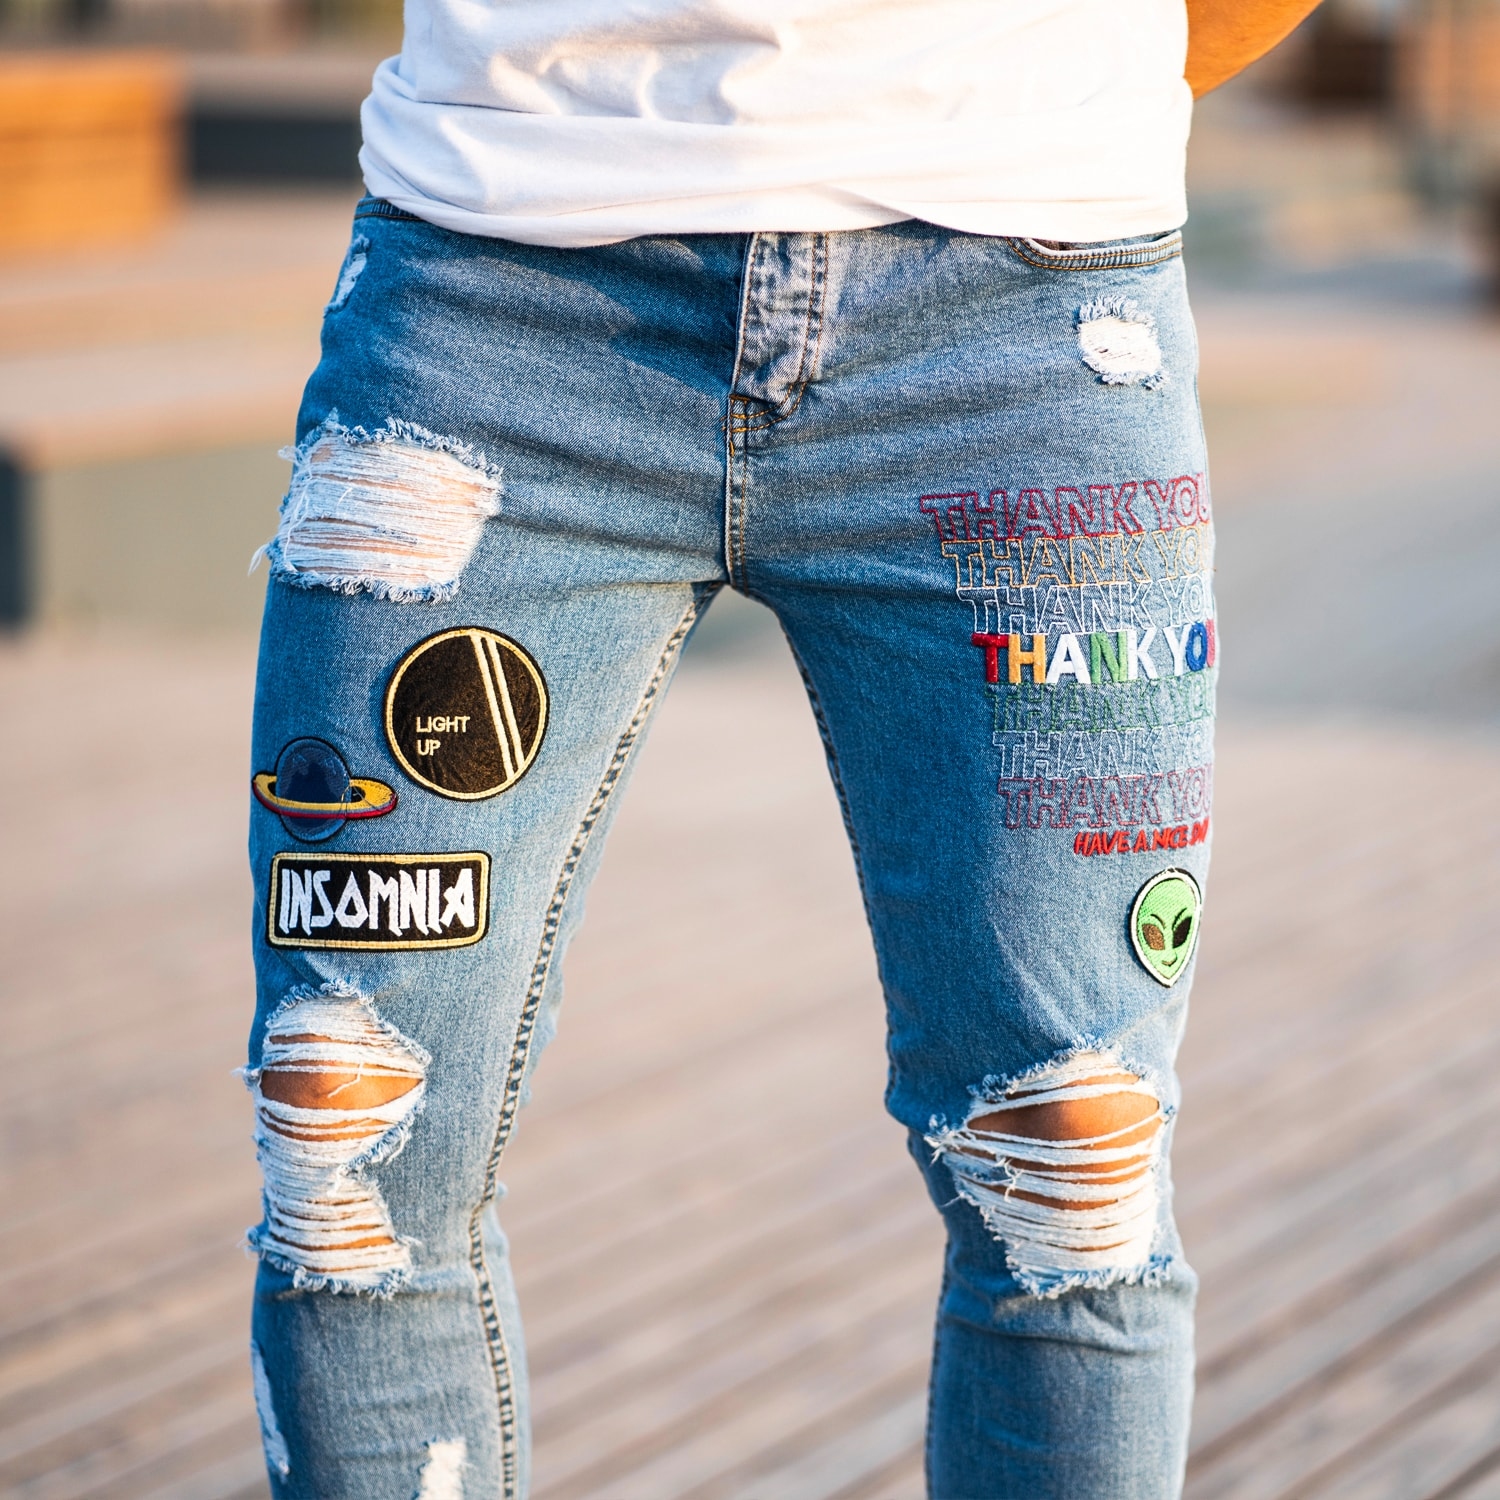 Men's Stylish Patchworked Jeans